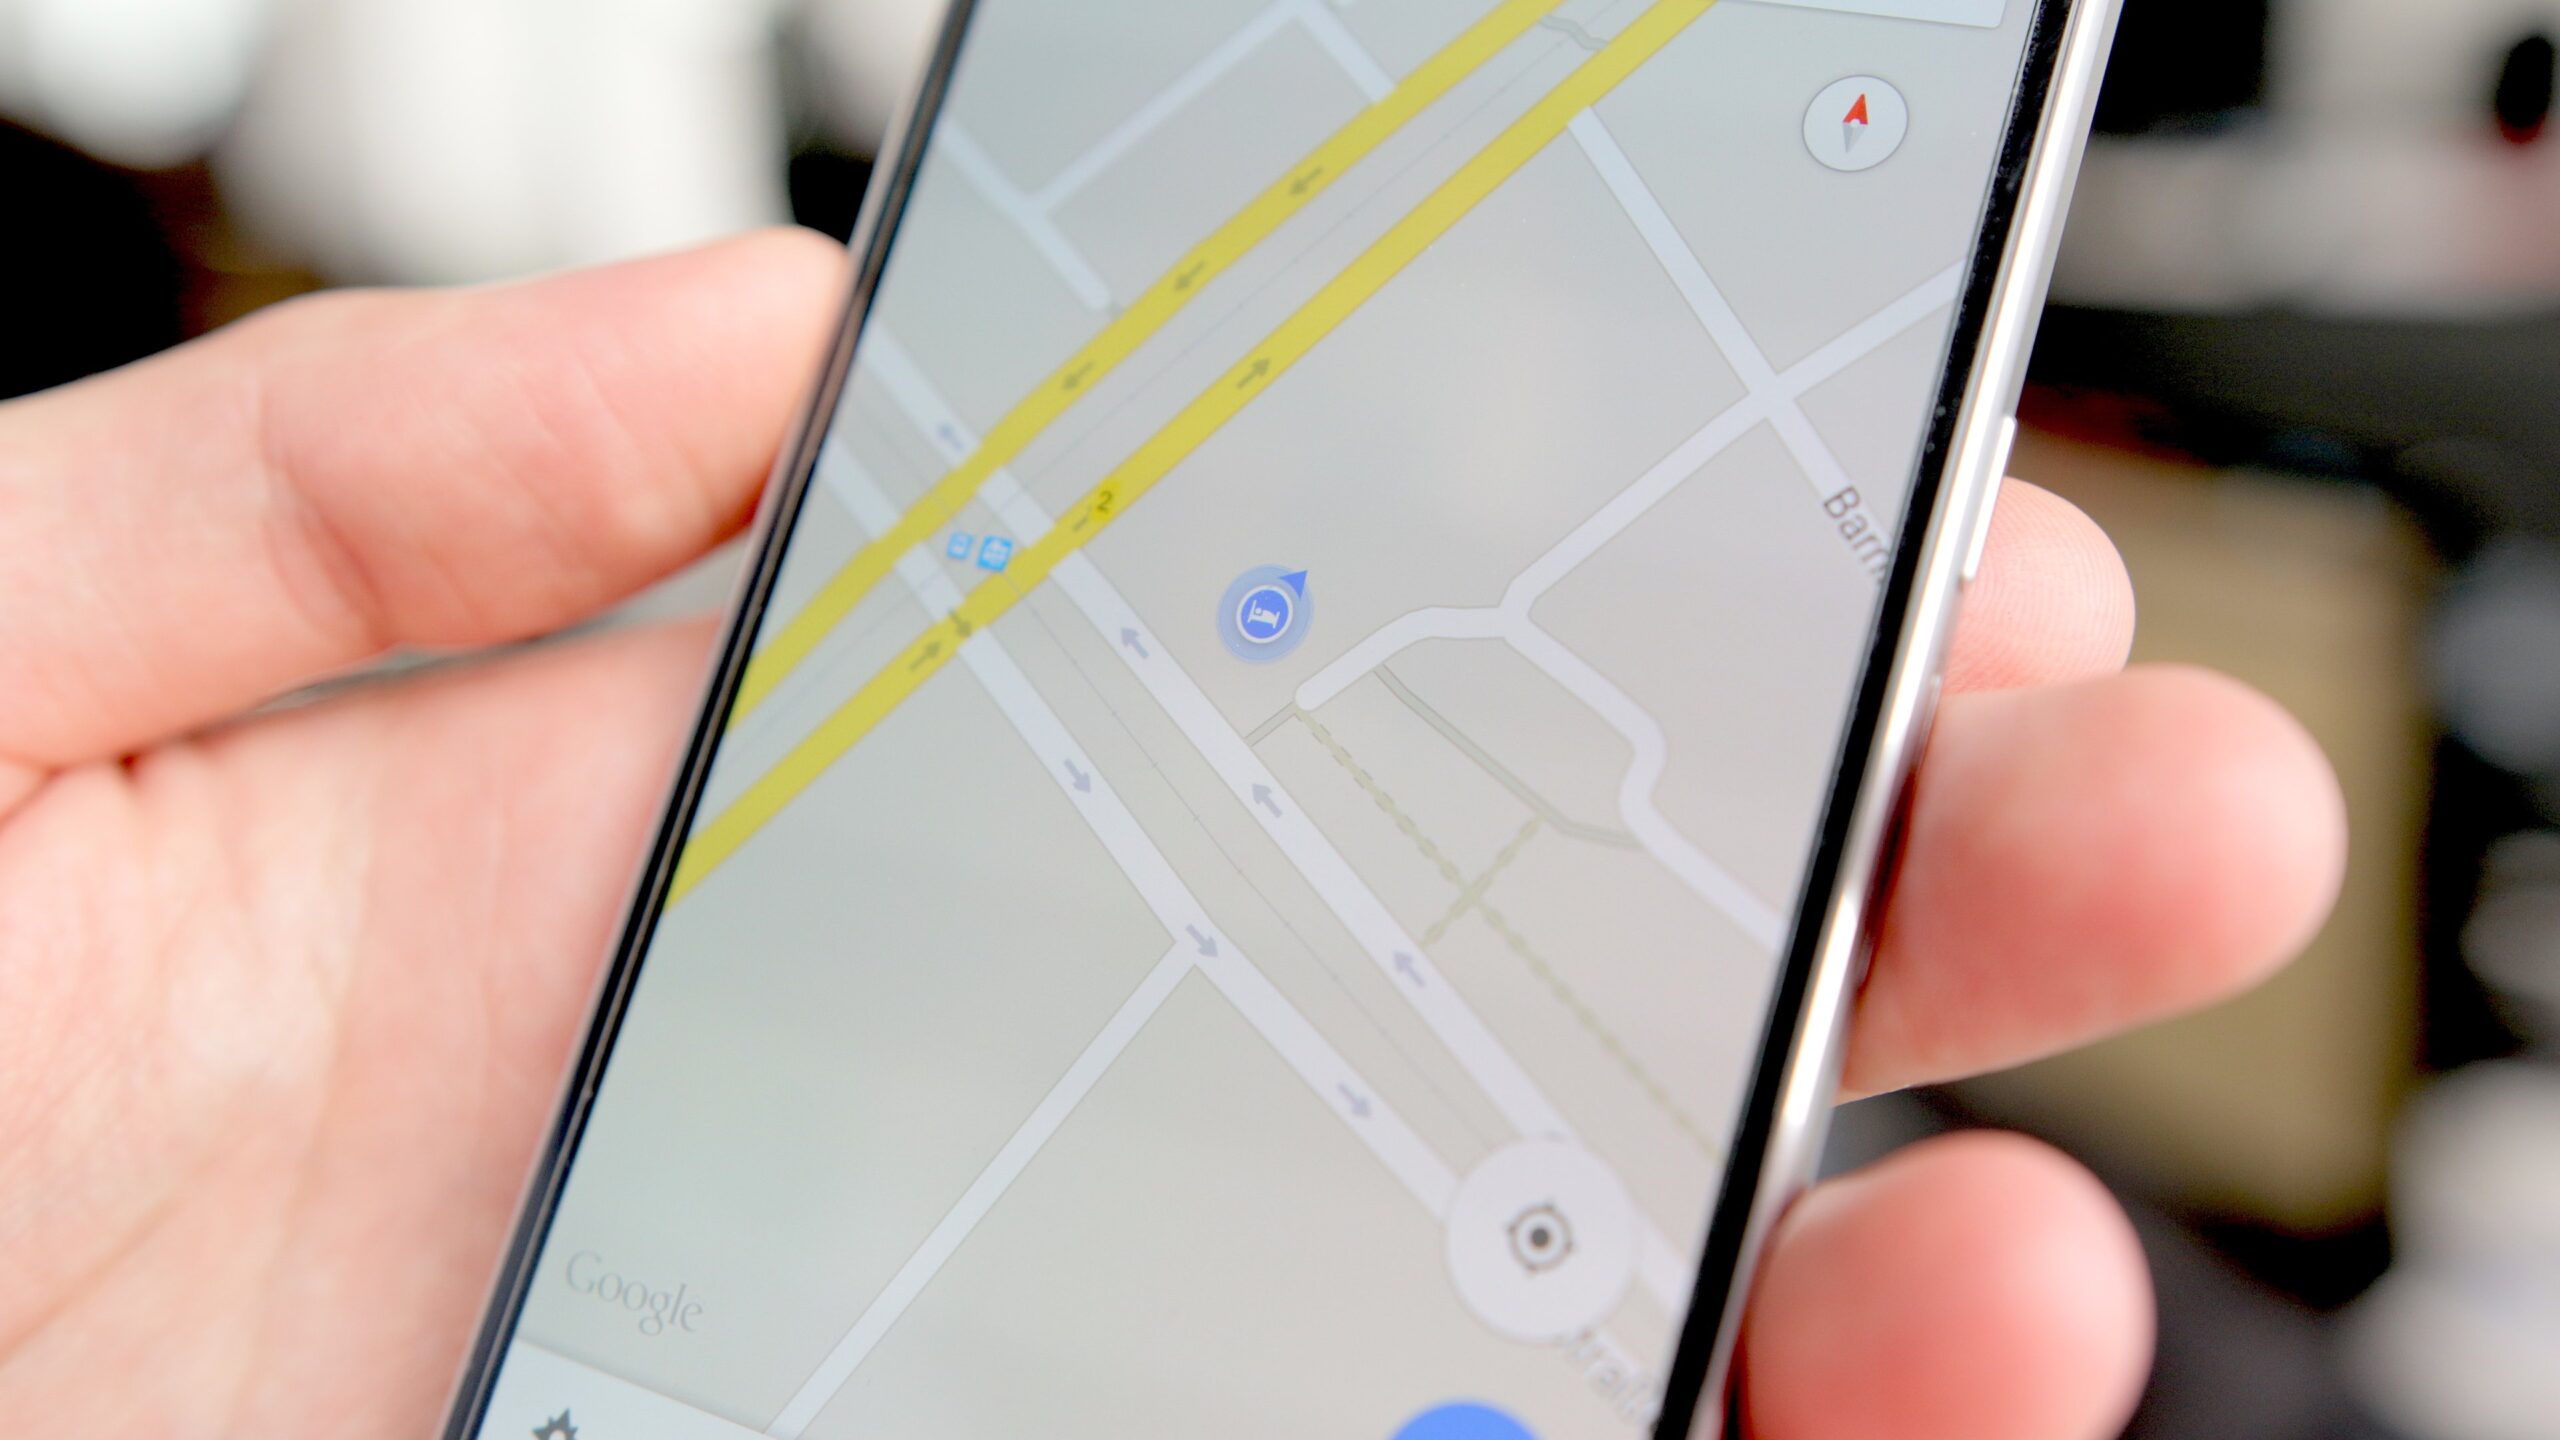 Download: Google Maps gets a new look and gets even more practical